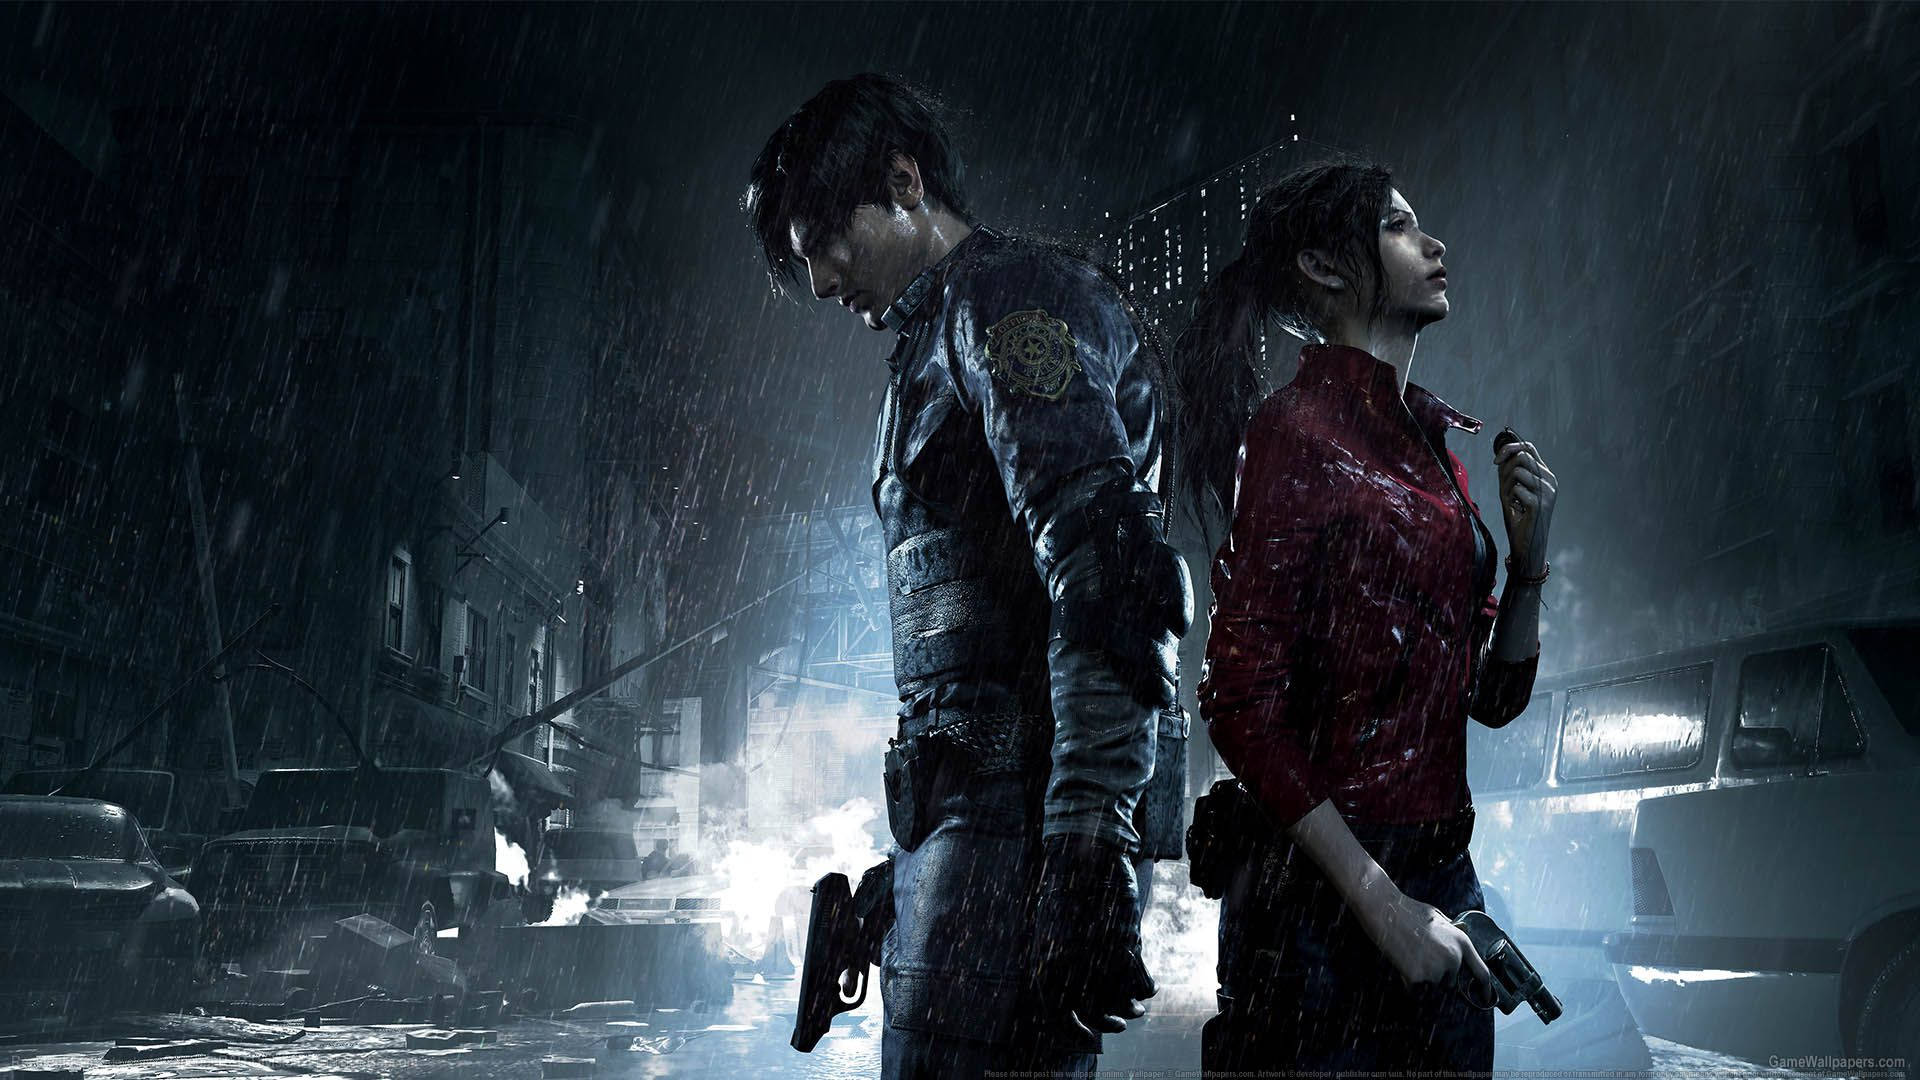 Leon and Claire search for answers on a rainy night in Raccoon City Wallpaper